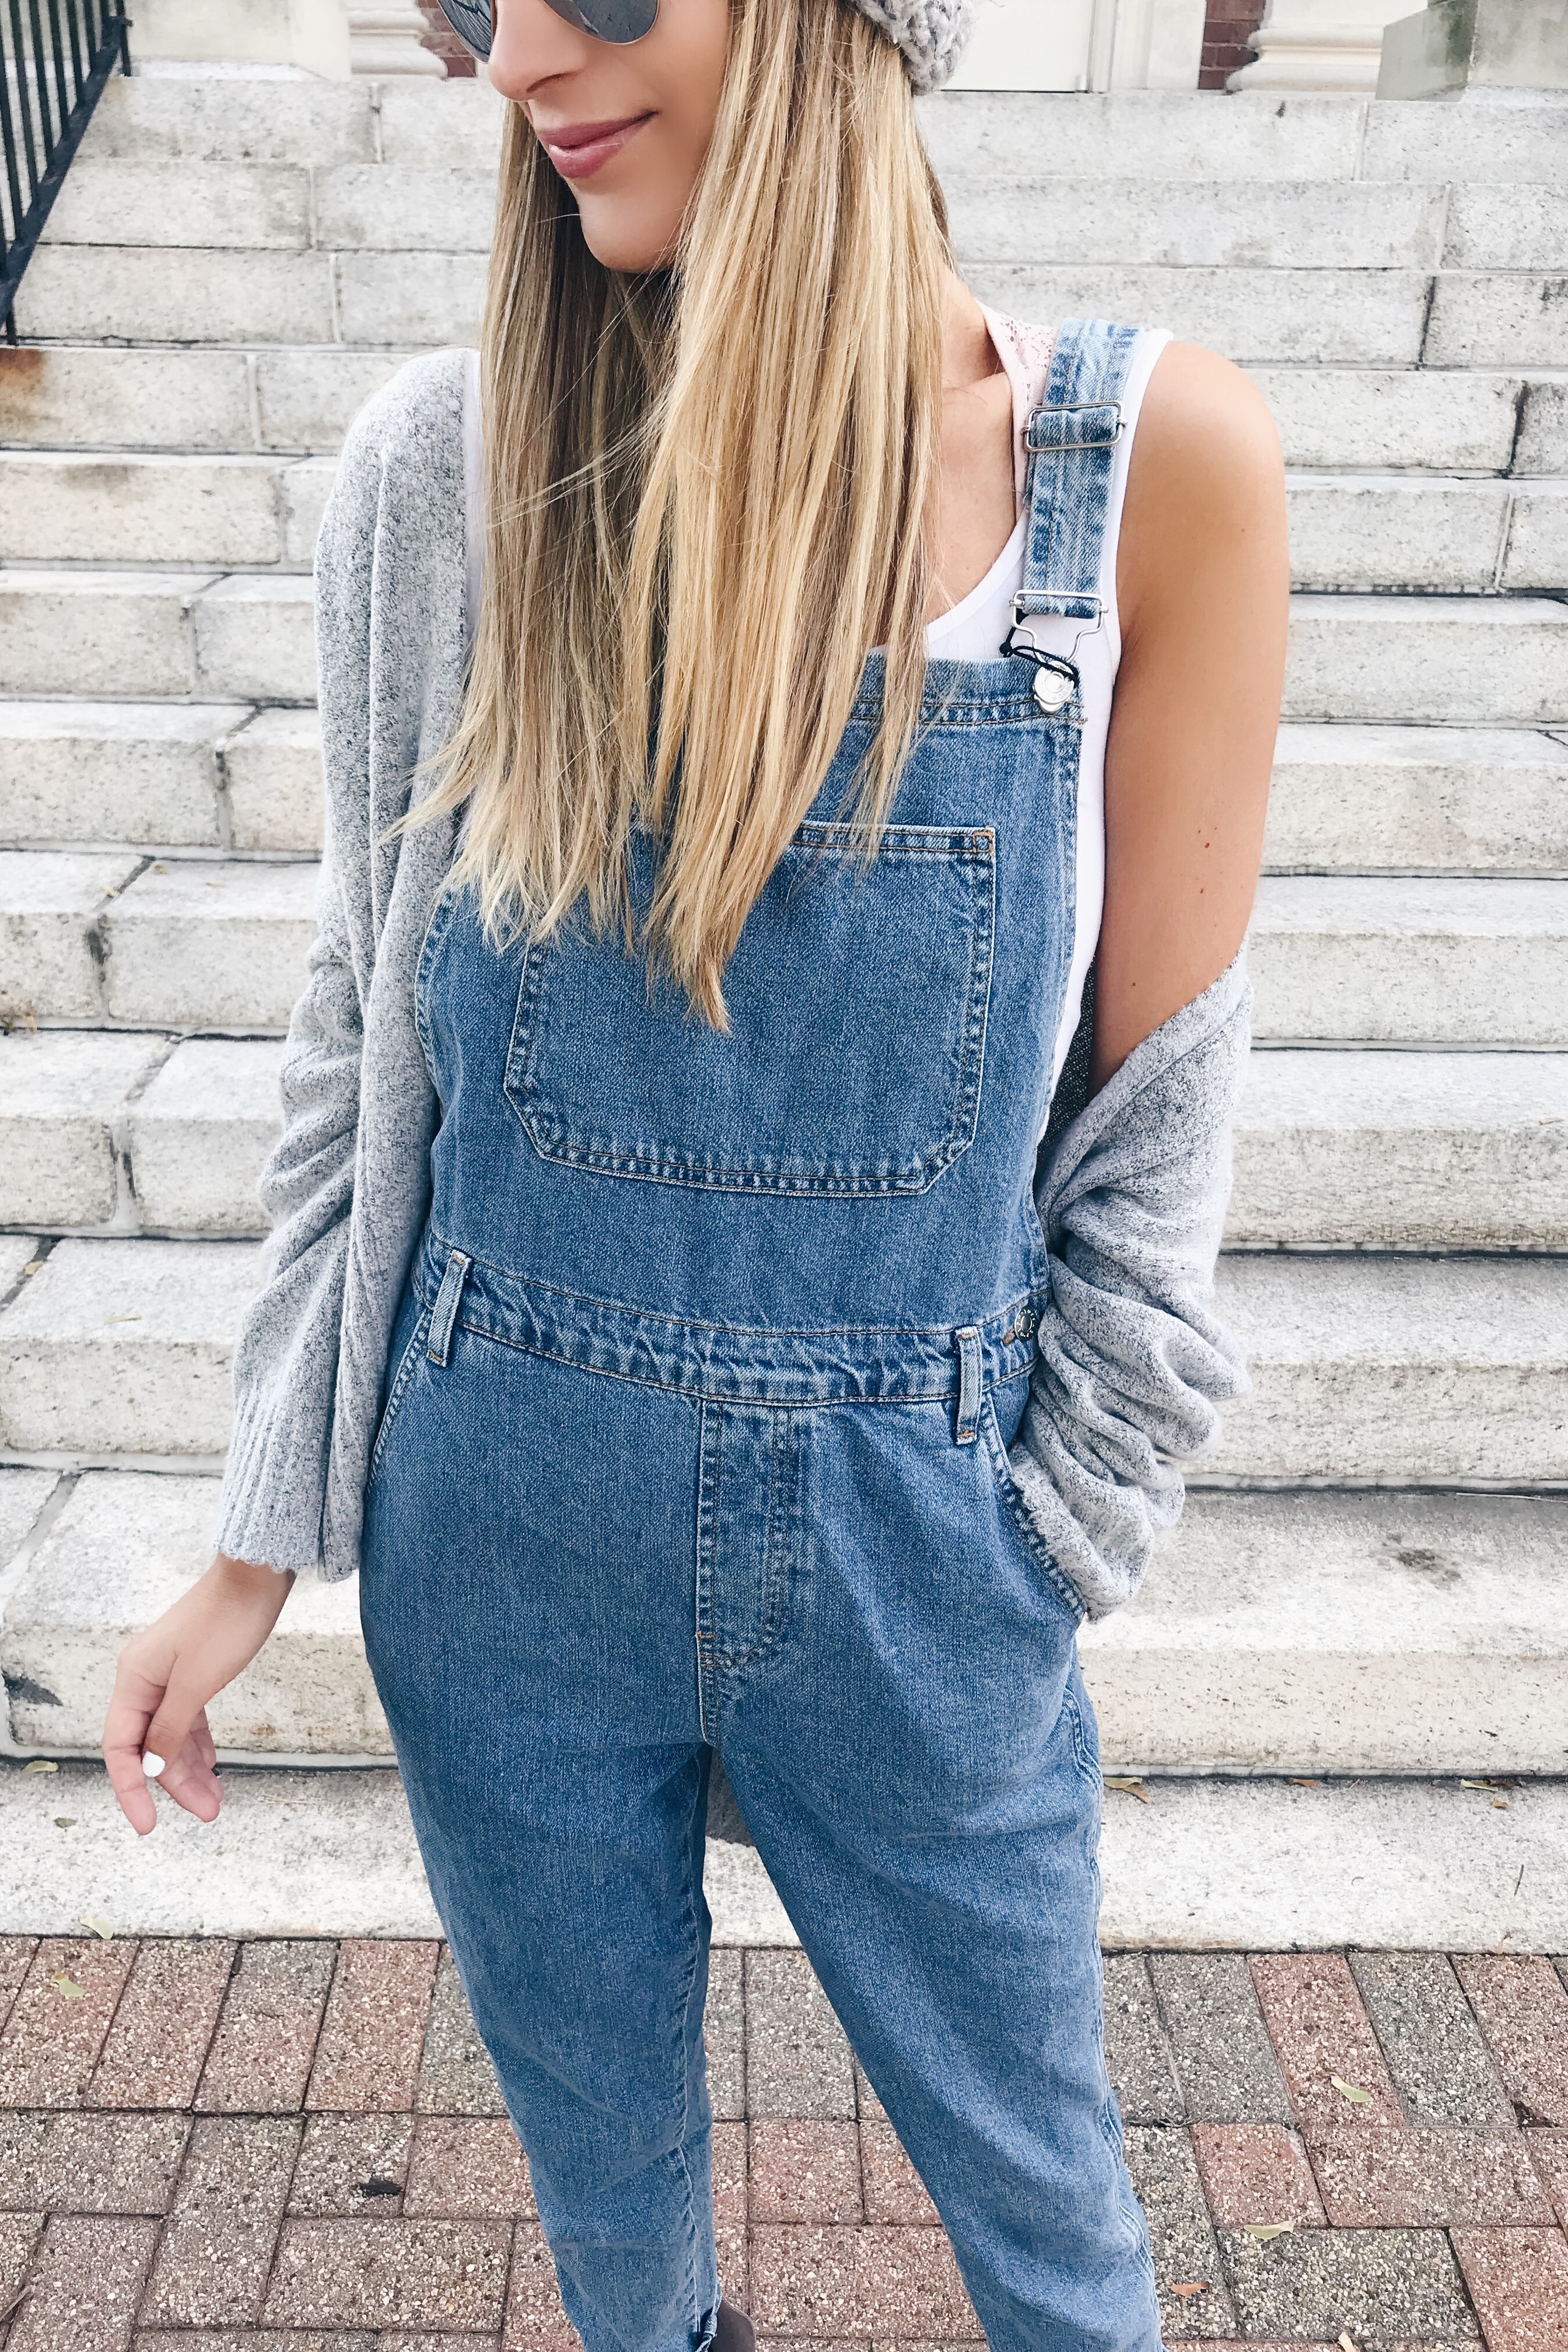 Fall fashion trends 2018 - overalls on Pinteresting Plans Connecticut Fashion blogger